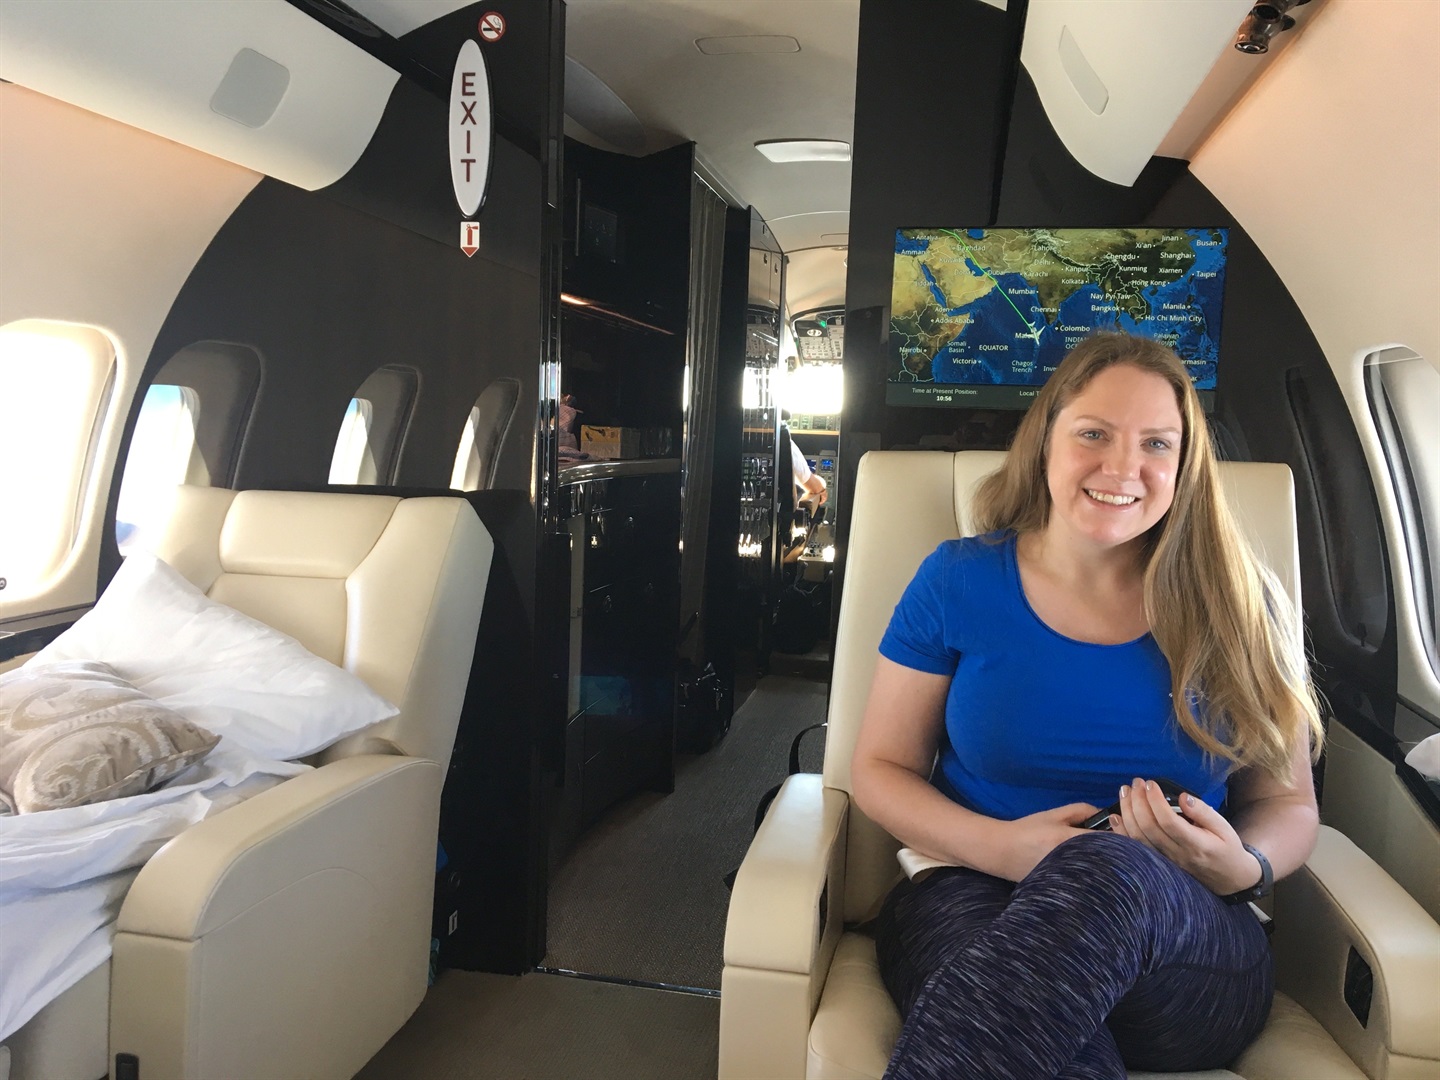 A British nanny who traveled the world with billionaire families shared her wildest experiences on the job | Business Insider